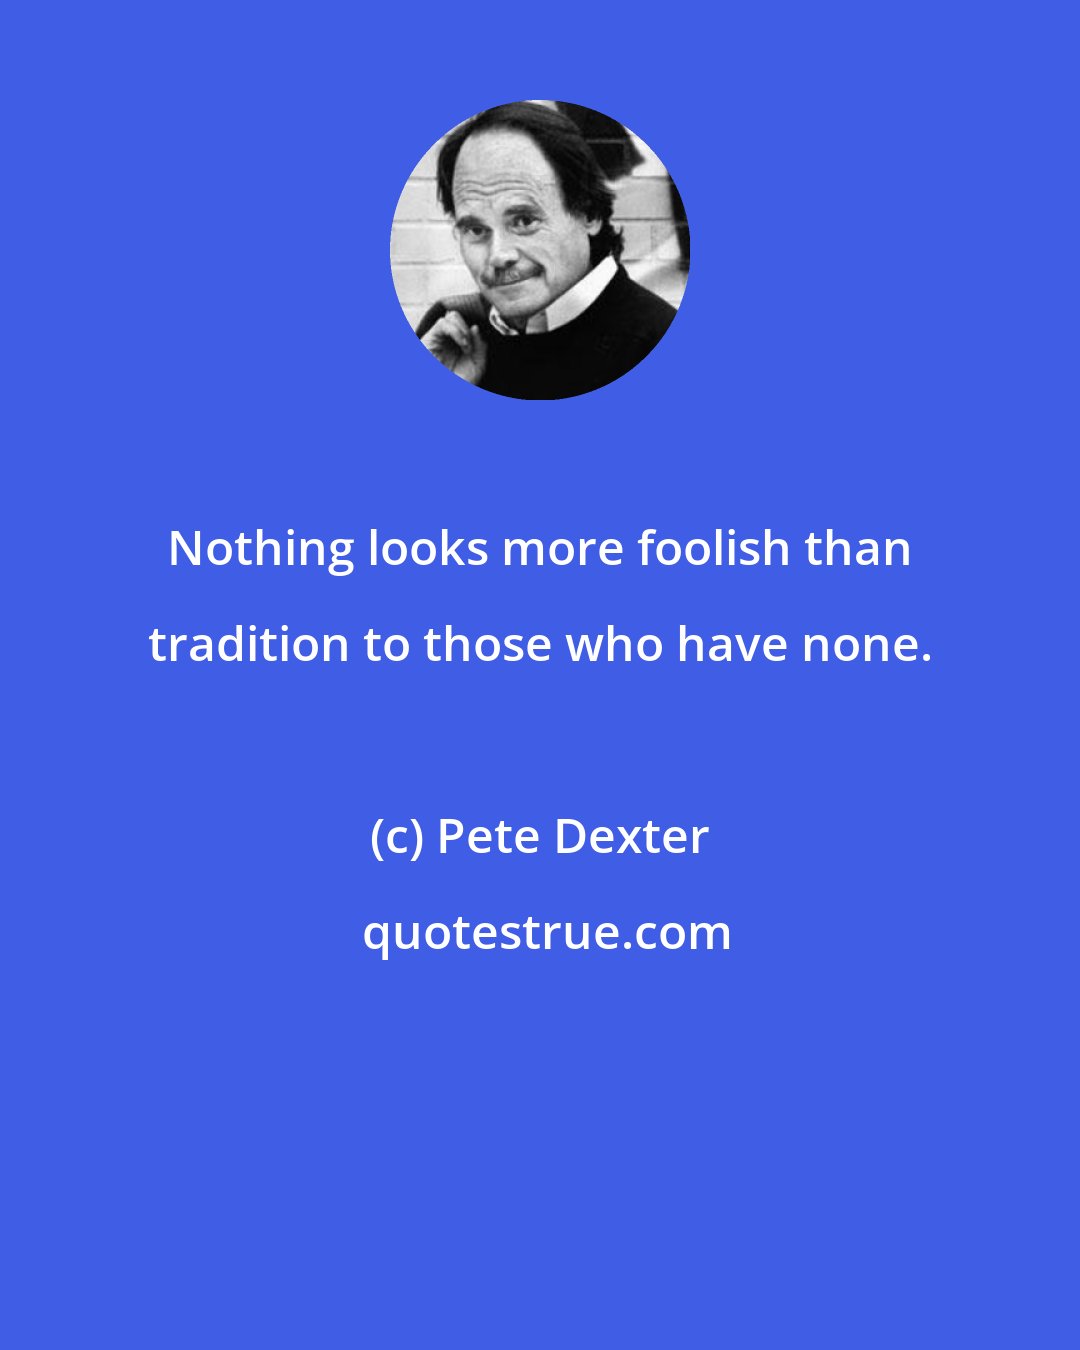 Pete Dexter: Nothing looks more foolish than tradition to those who have none.